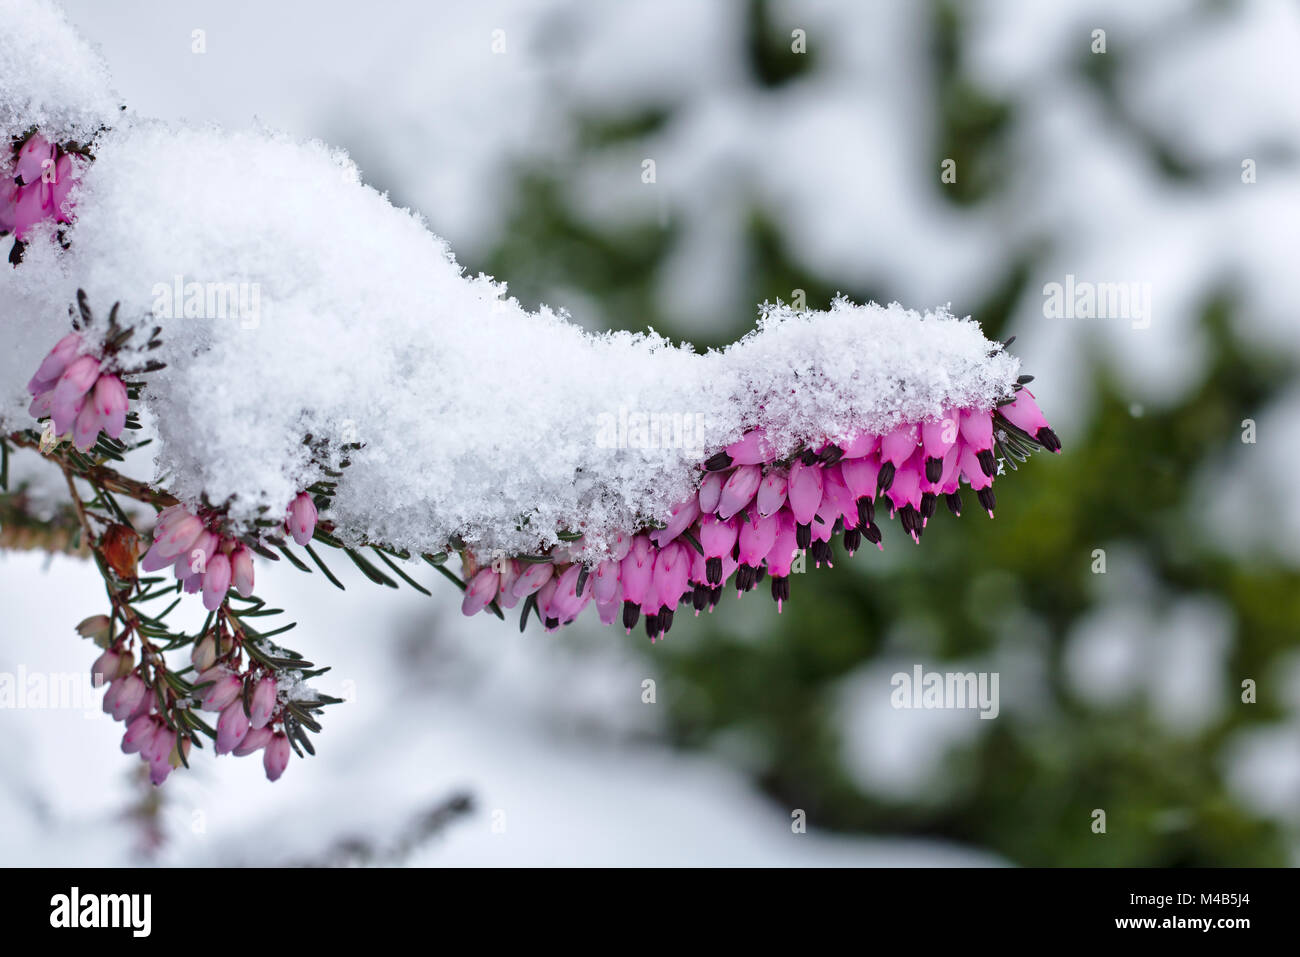 Snow-covered spring heath in bloom Stock Photo